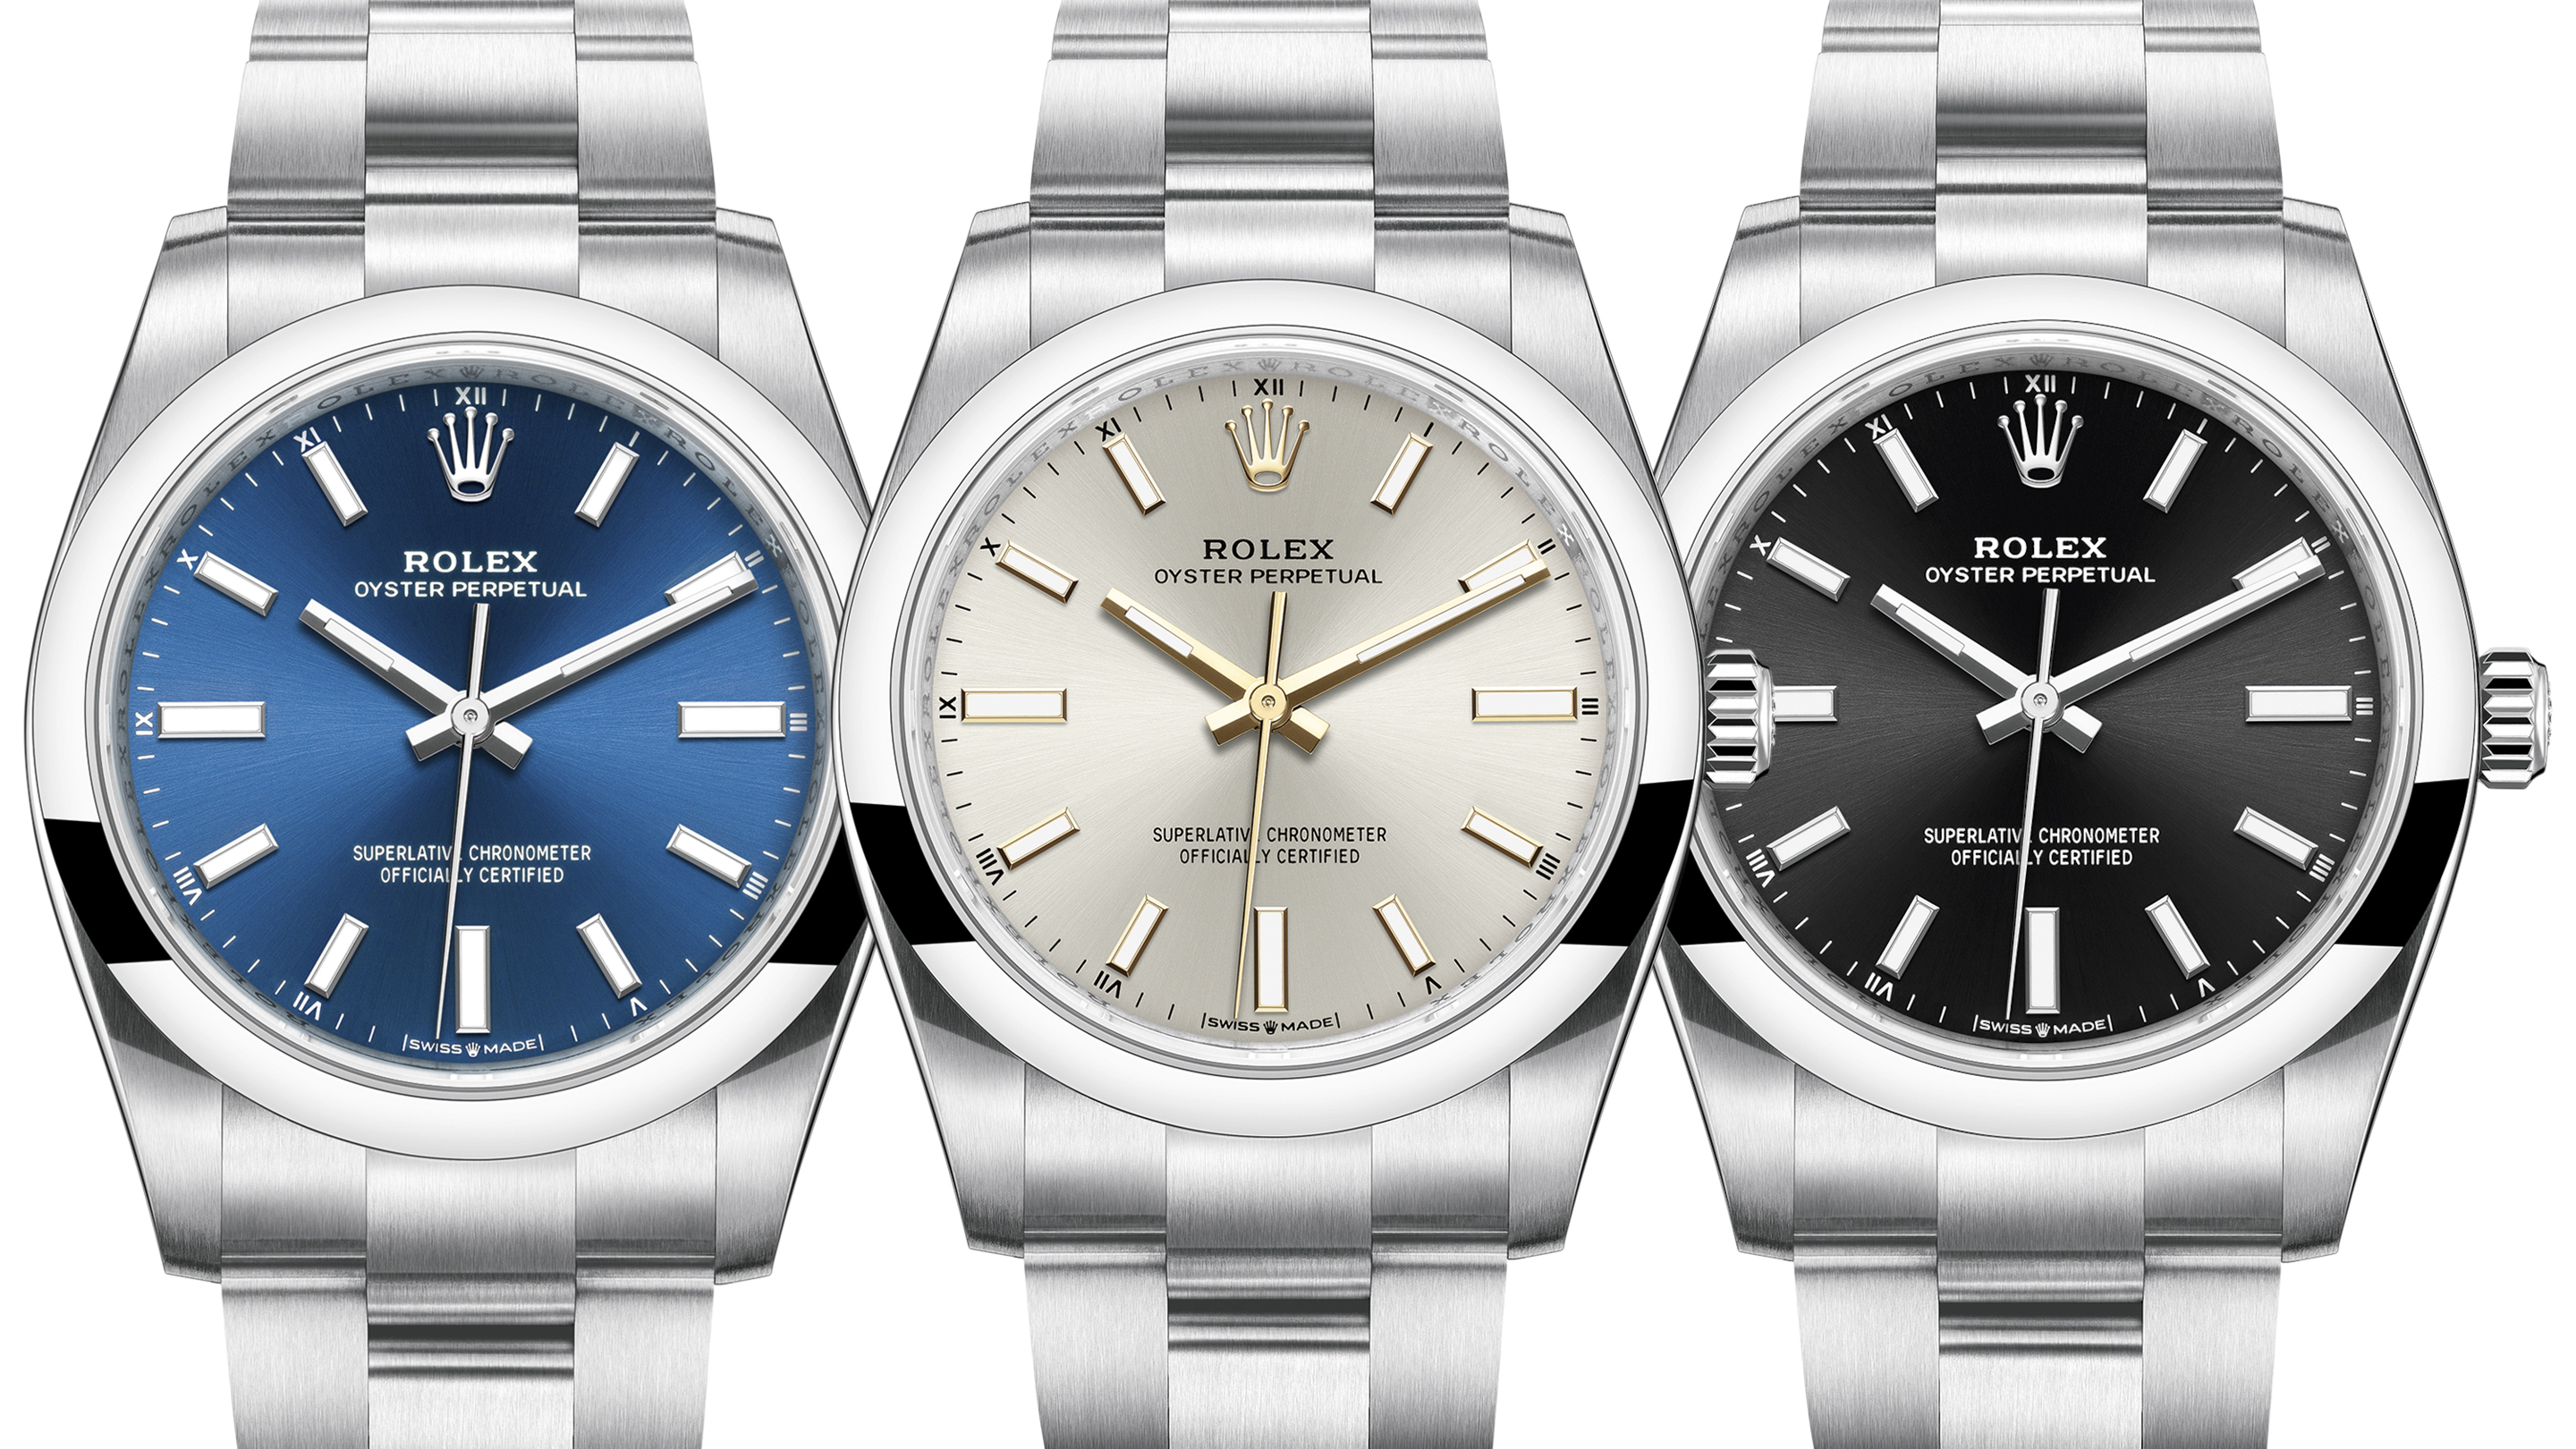 Introducing: The New Rolex Release You 